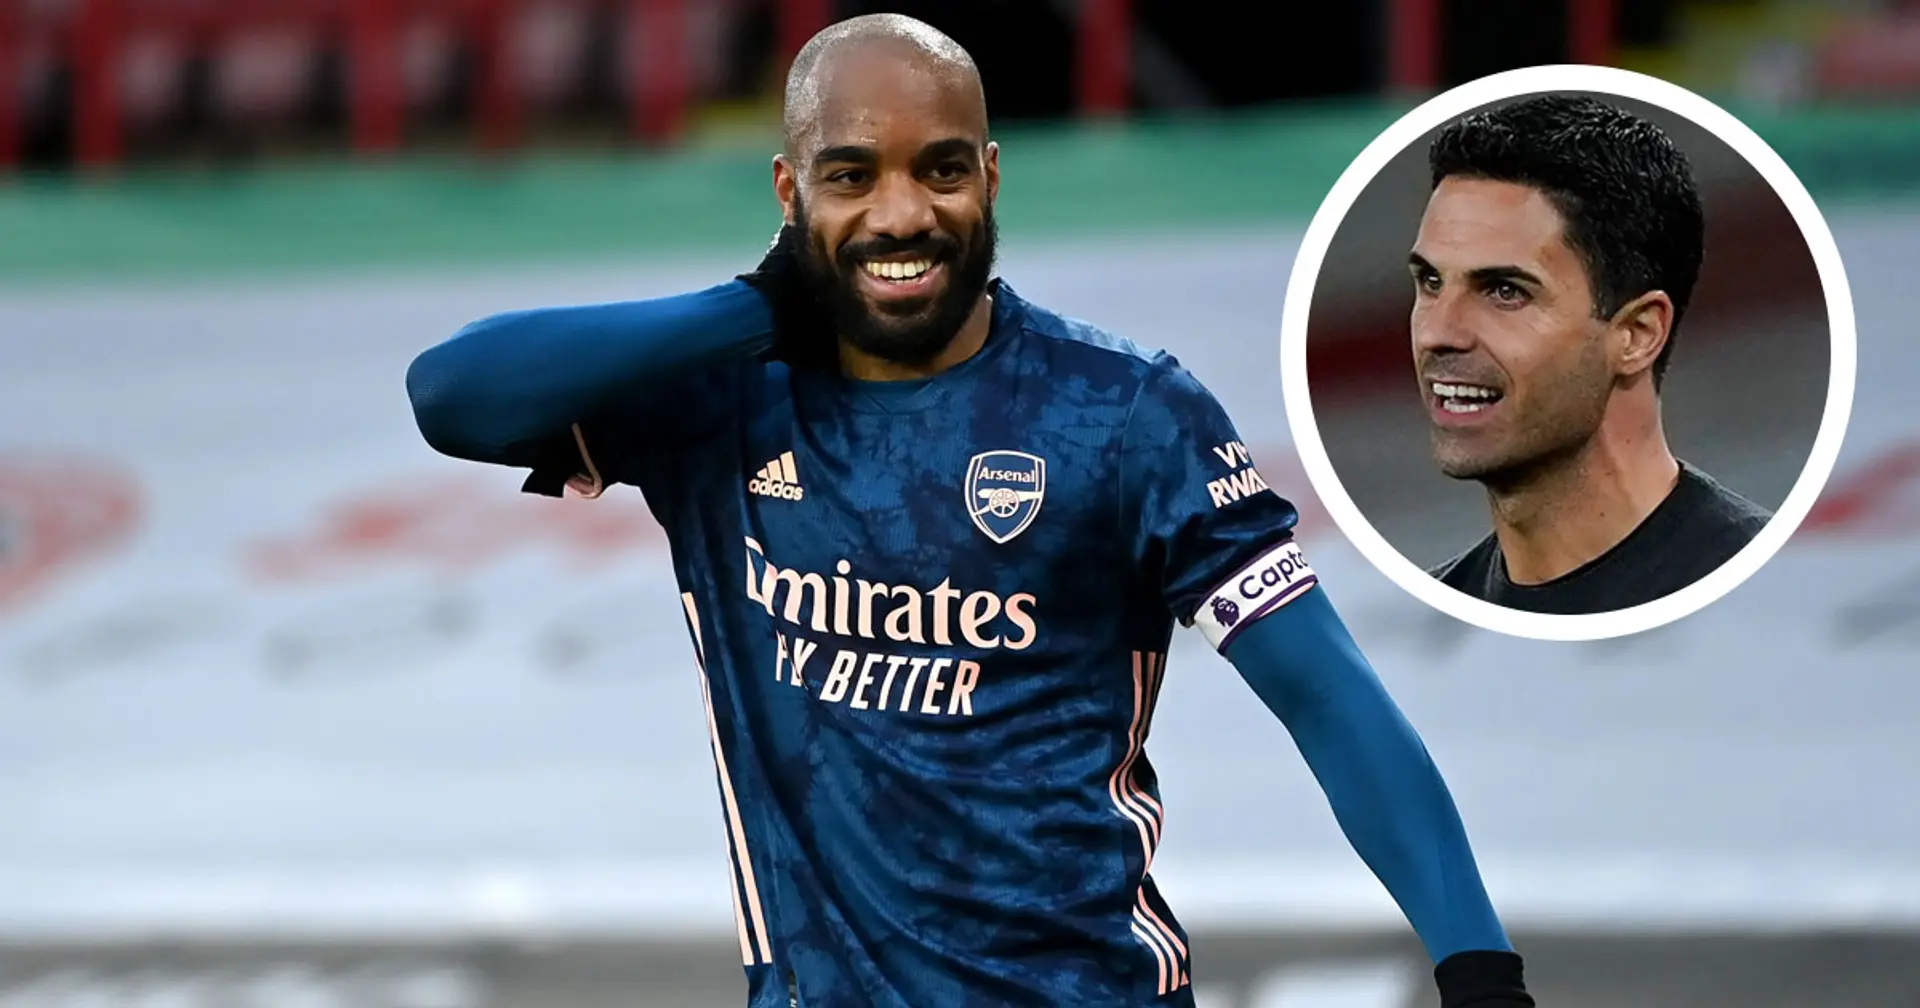 'He really glues the team together’: Arteta hails Lacazette's strong character after consecutive braces